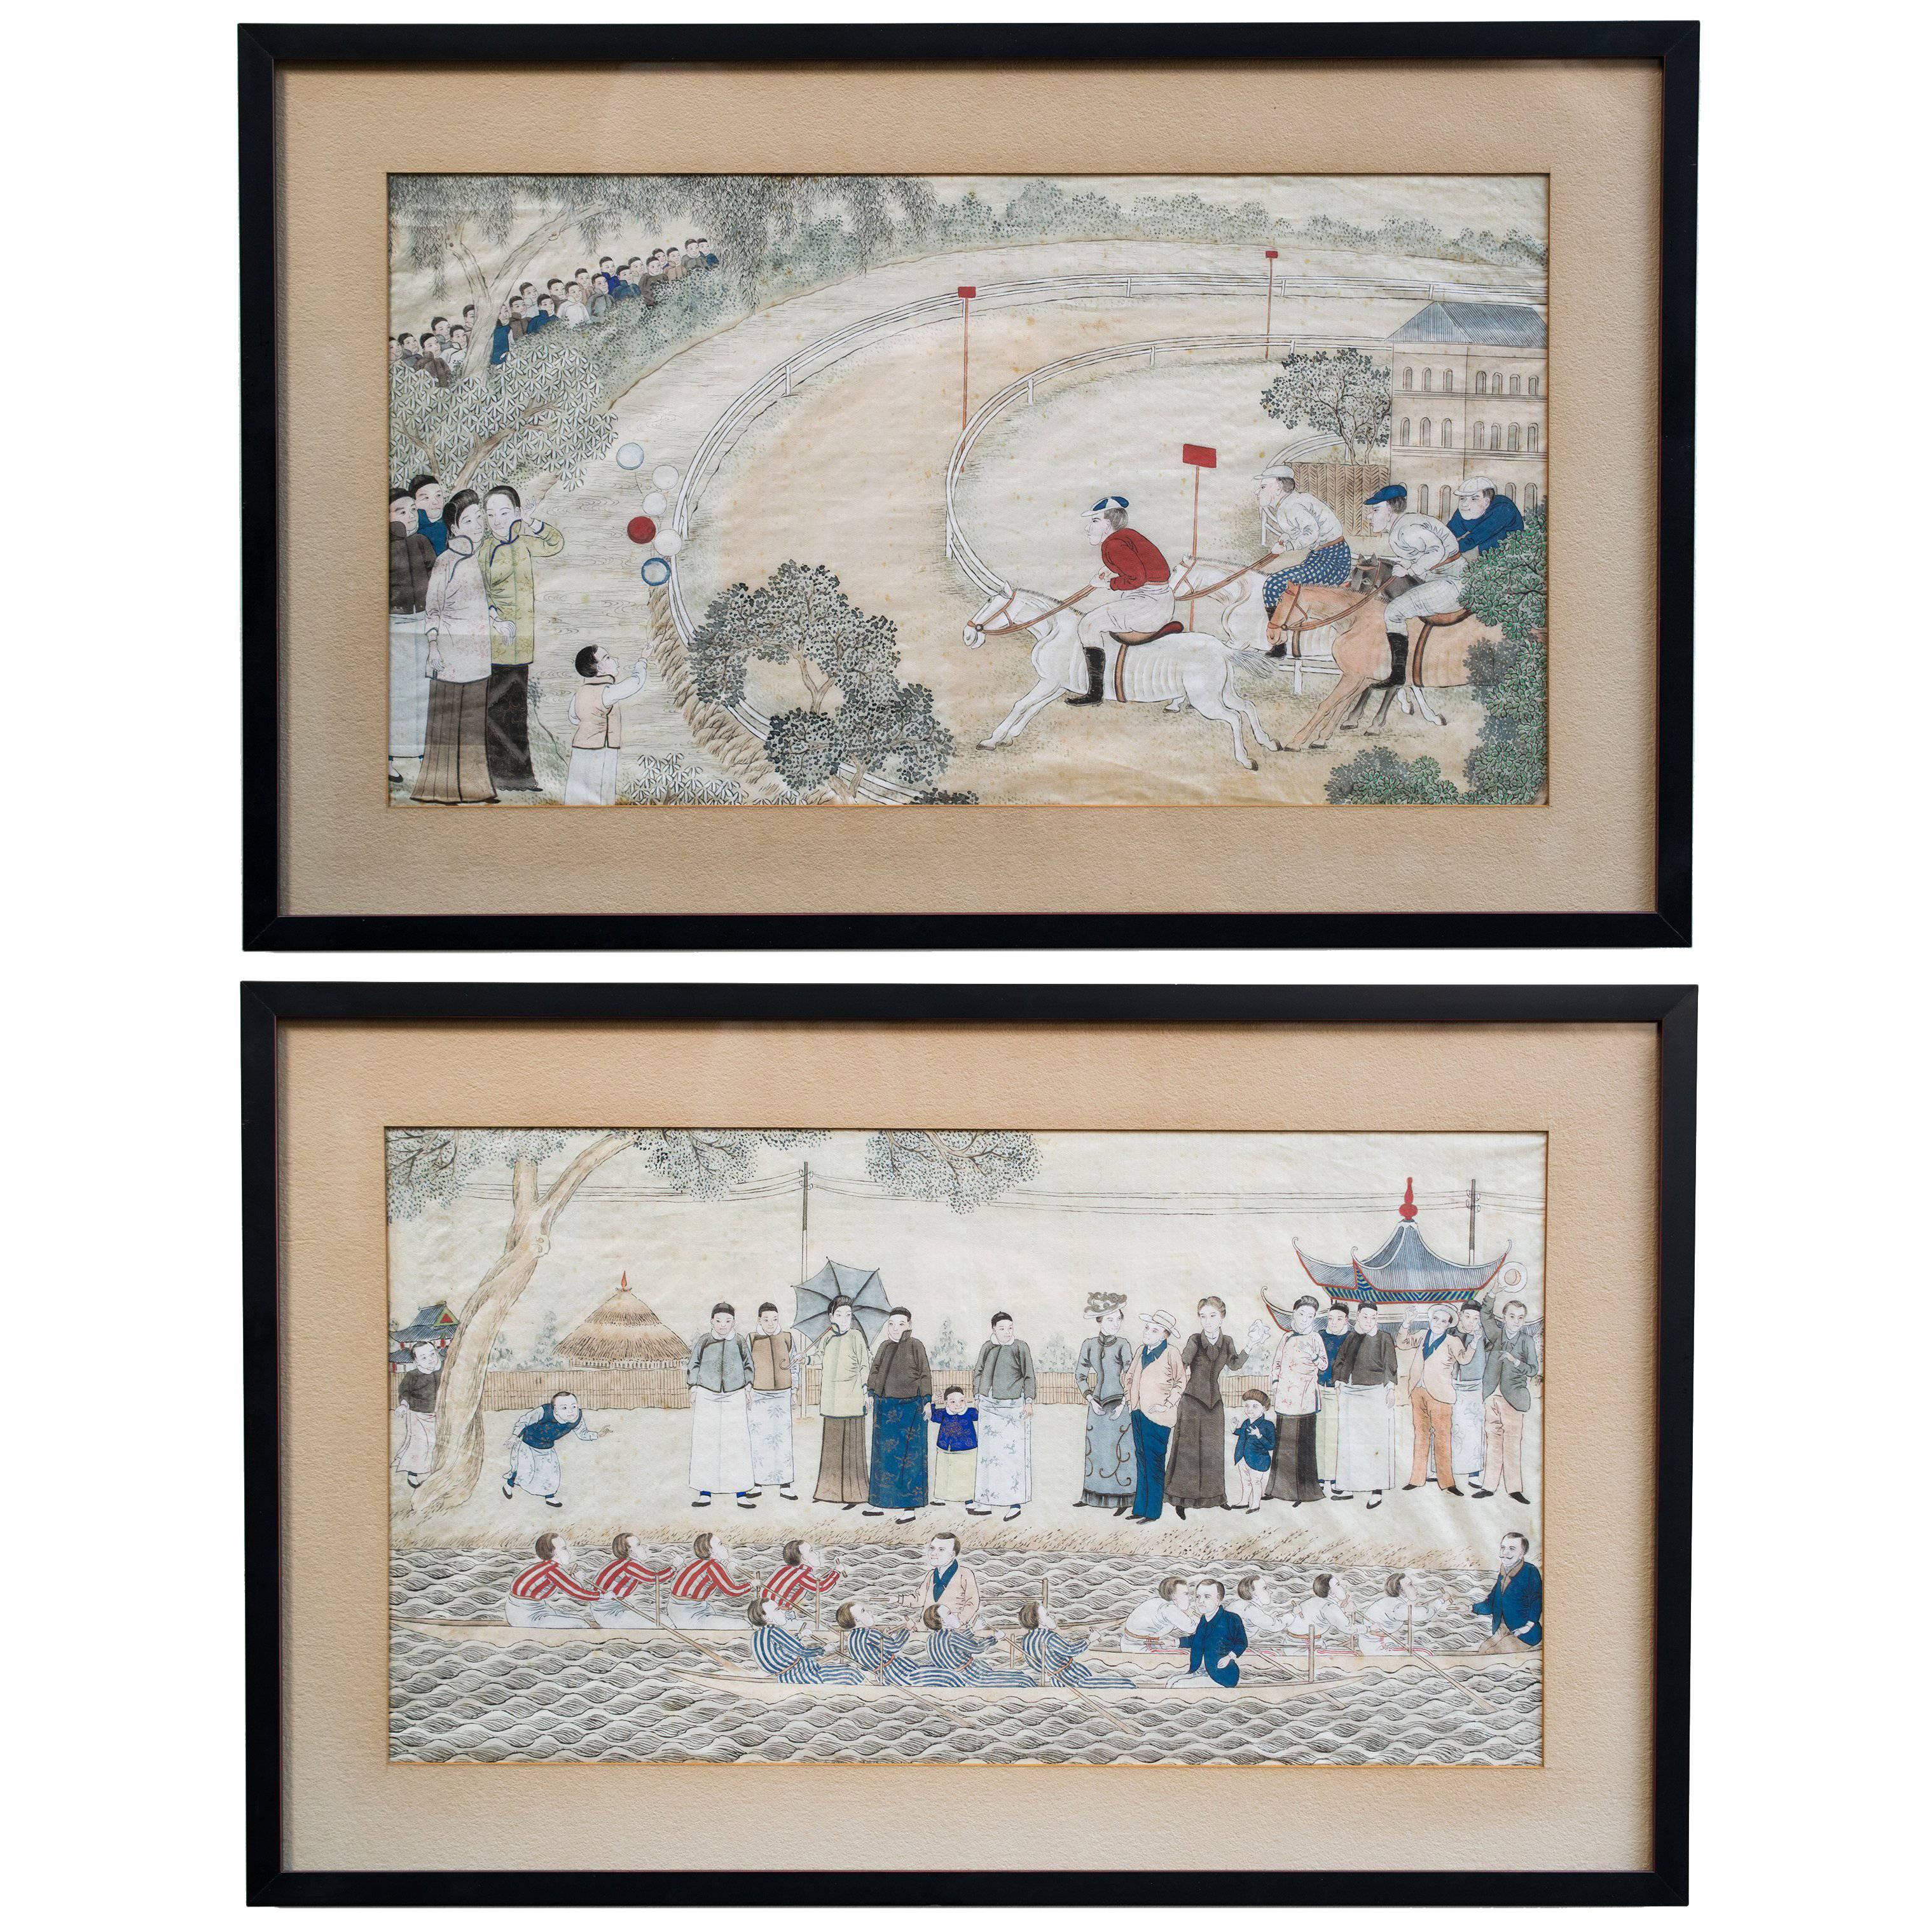 "Shanghai Race and Rowing Club" Pair of Chinese Silk Paintings